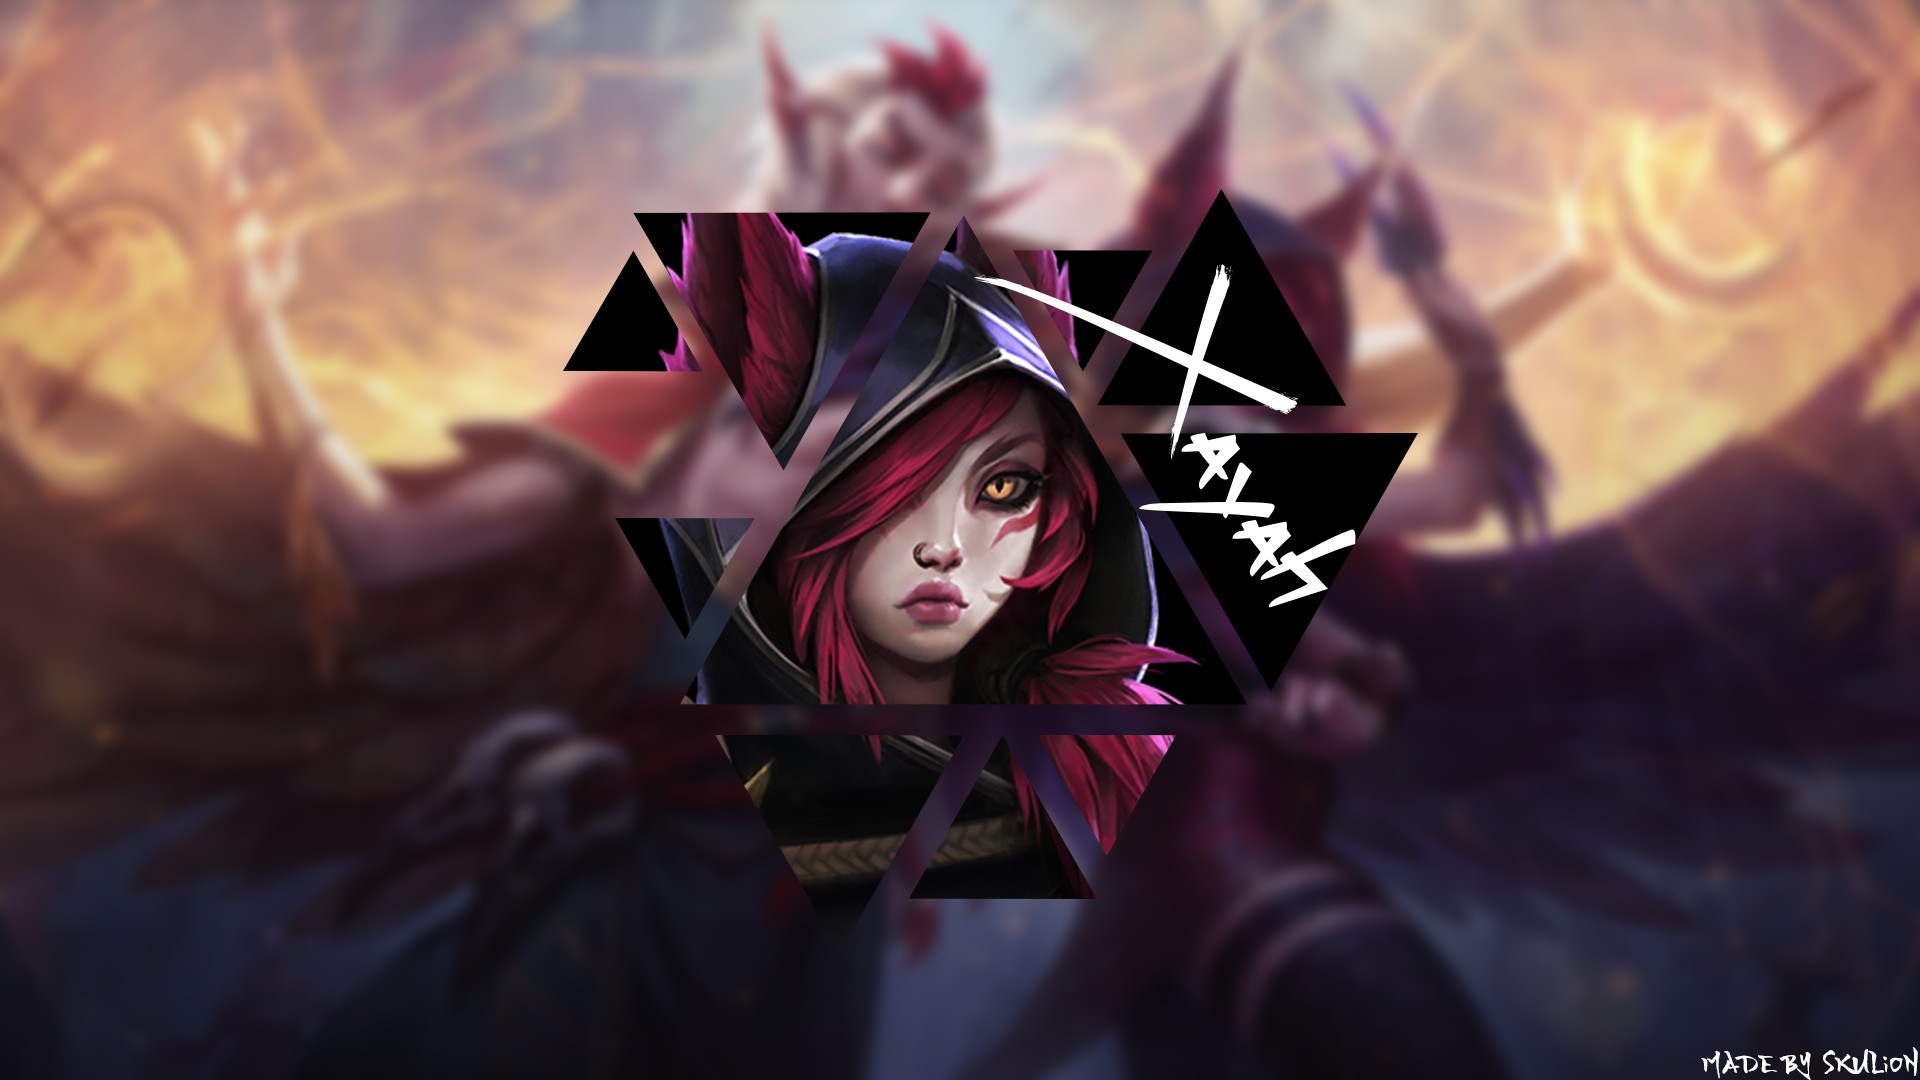 skulion, Xayah (League of Legends), Photoshop, Summoners Rift, Adcarry, League of Legends, Abstract Wallpaper